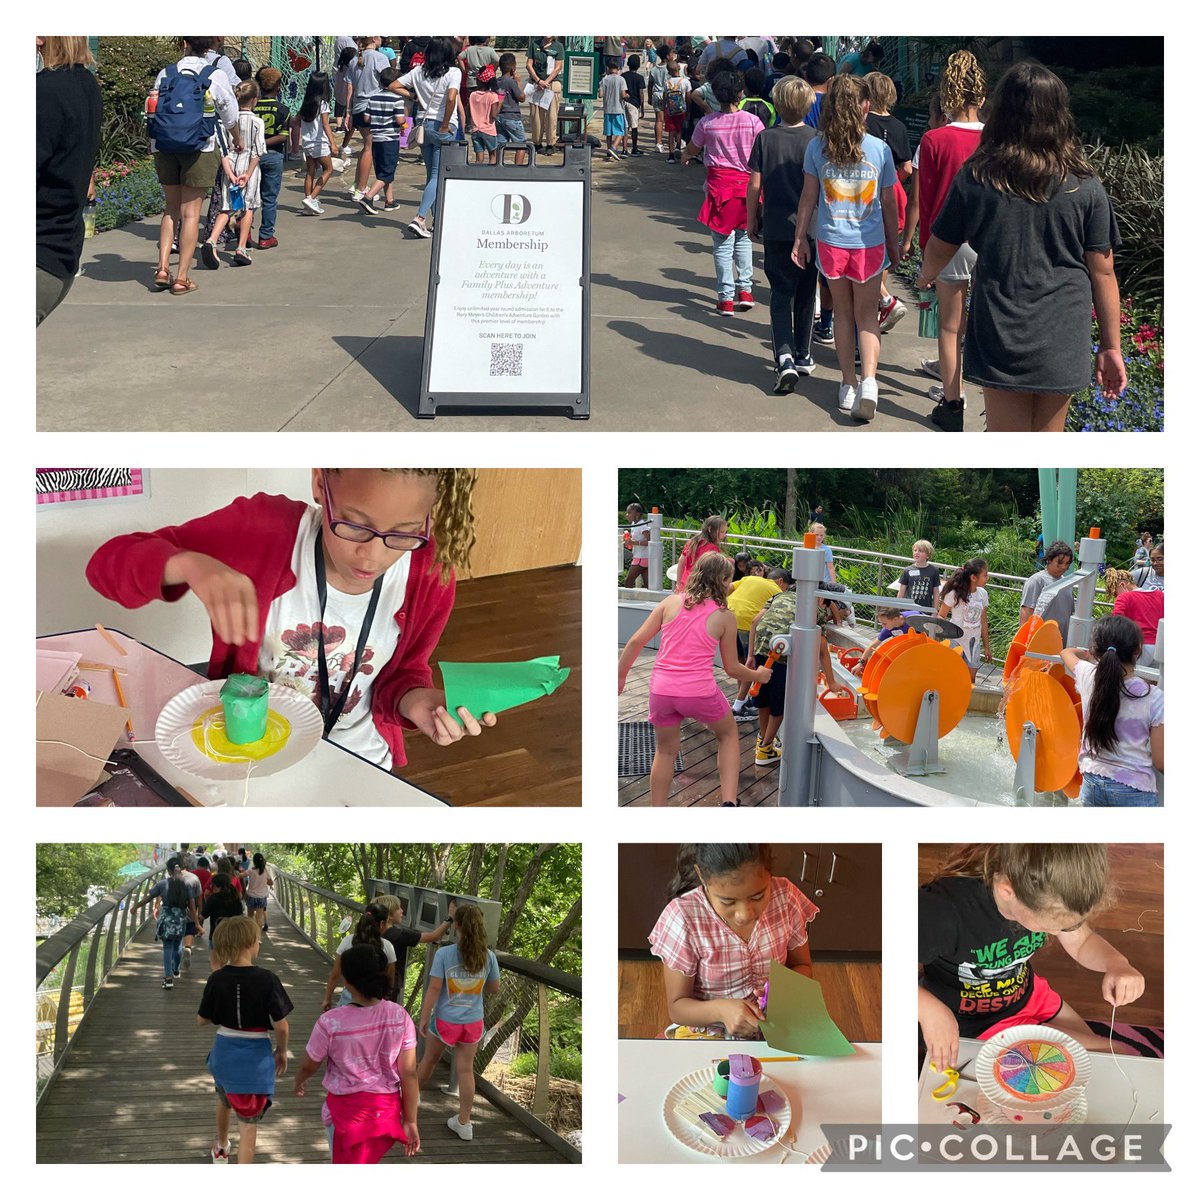 Summer school has been so exciting! We went to the @dallasarboretum and have been working on some incredible #STEM projects! @nherisd @PrincipalDawes #RISDignite @RichardsonISD #risdgreatness